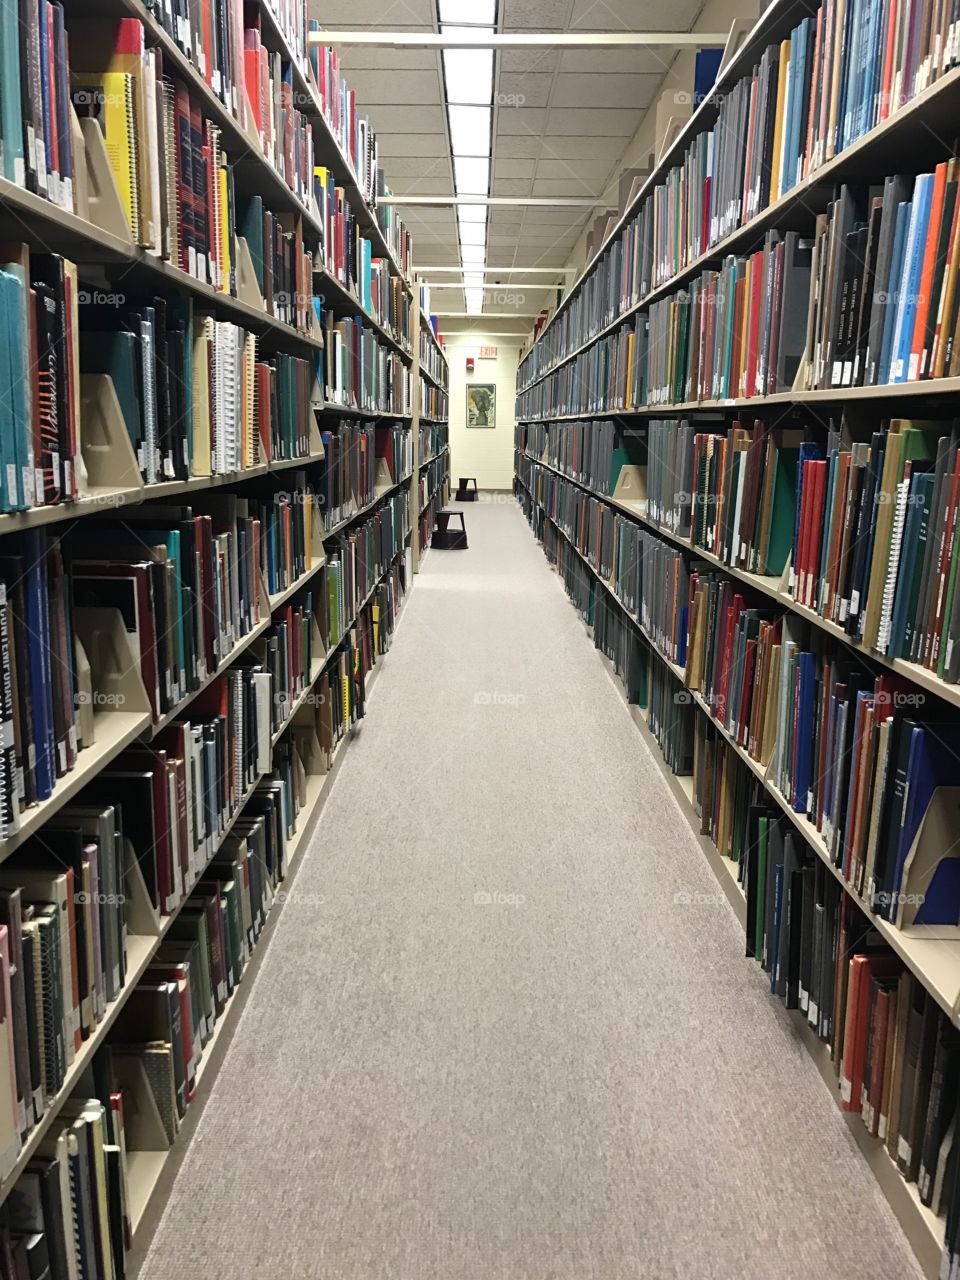 Hayes School of Music library